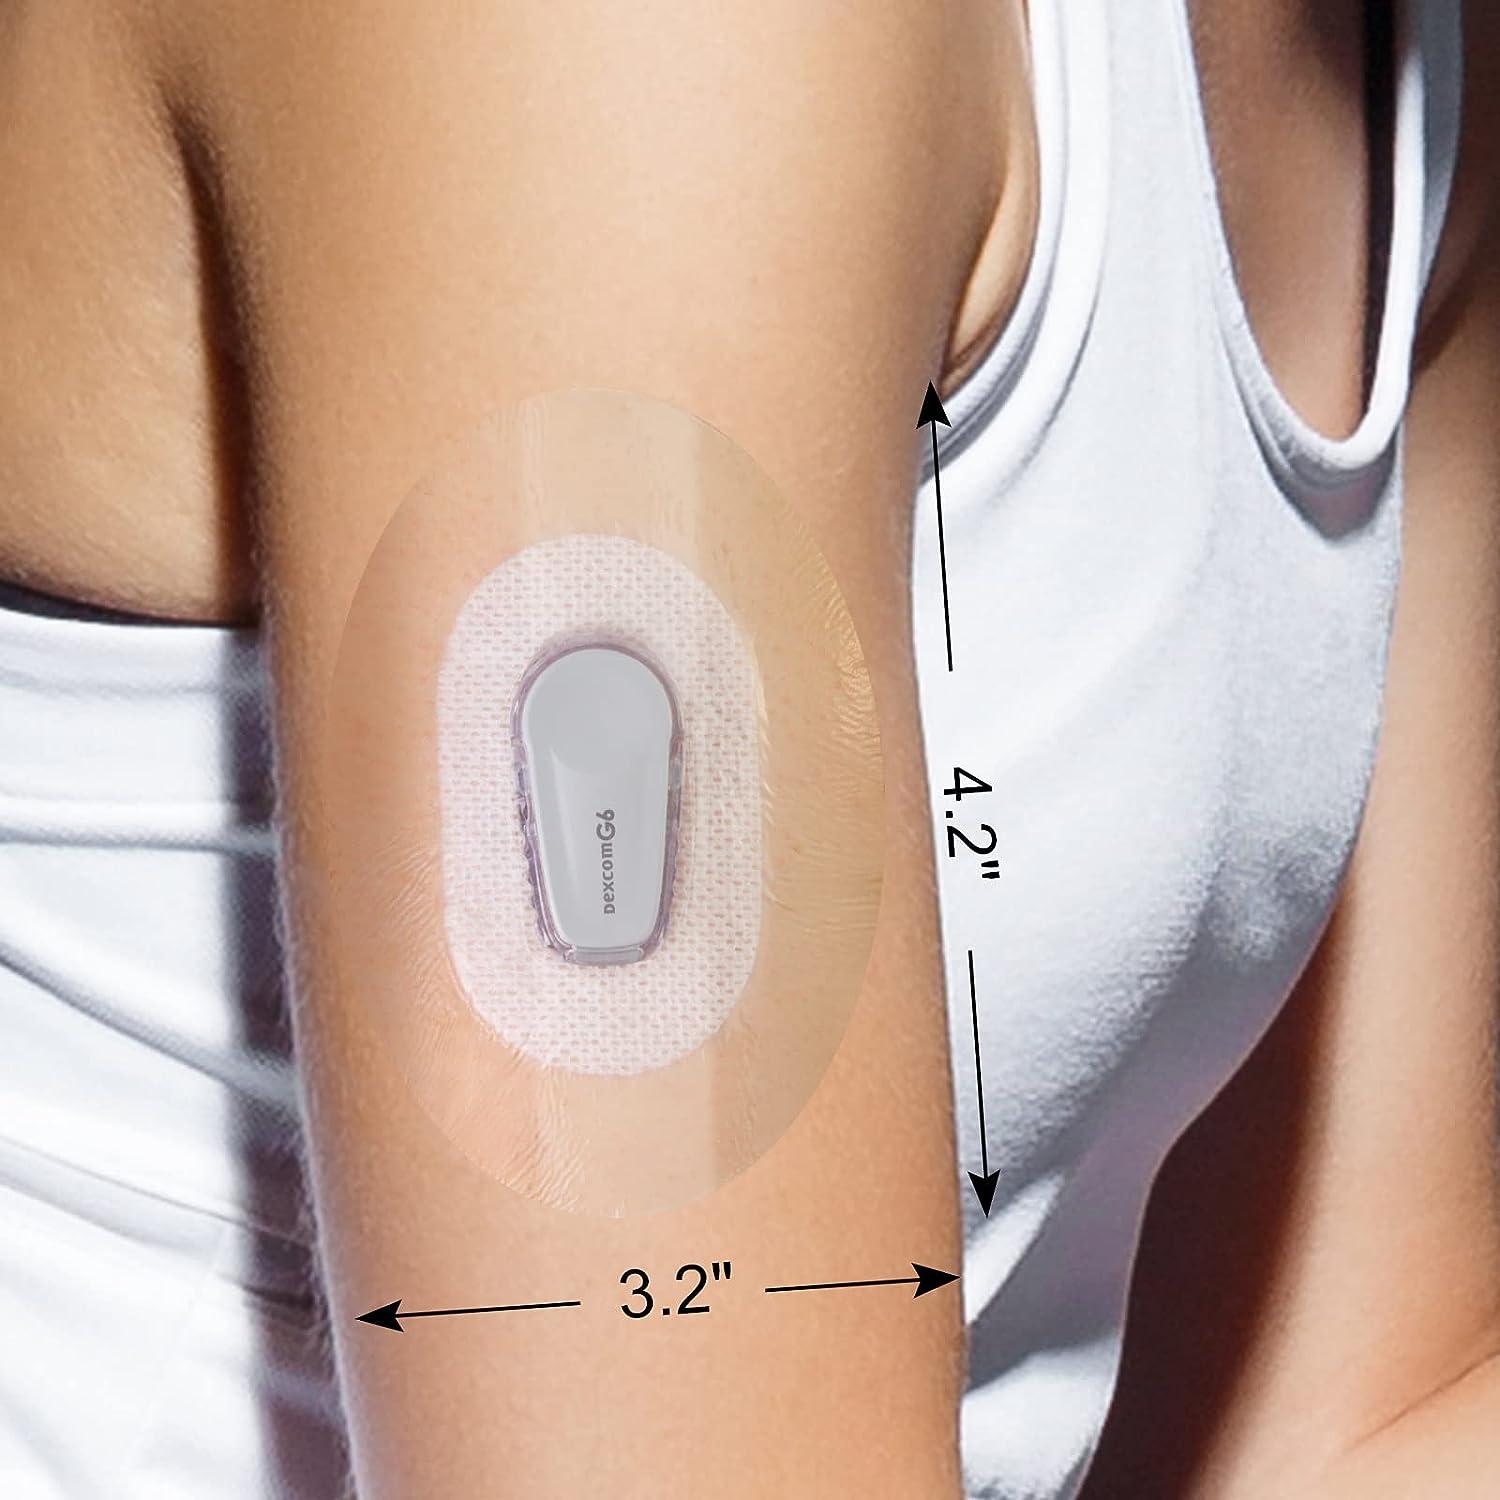 Adhesive Patches for Dexcom G6 Sensor Covers Overpatch Waterproof